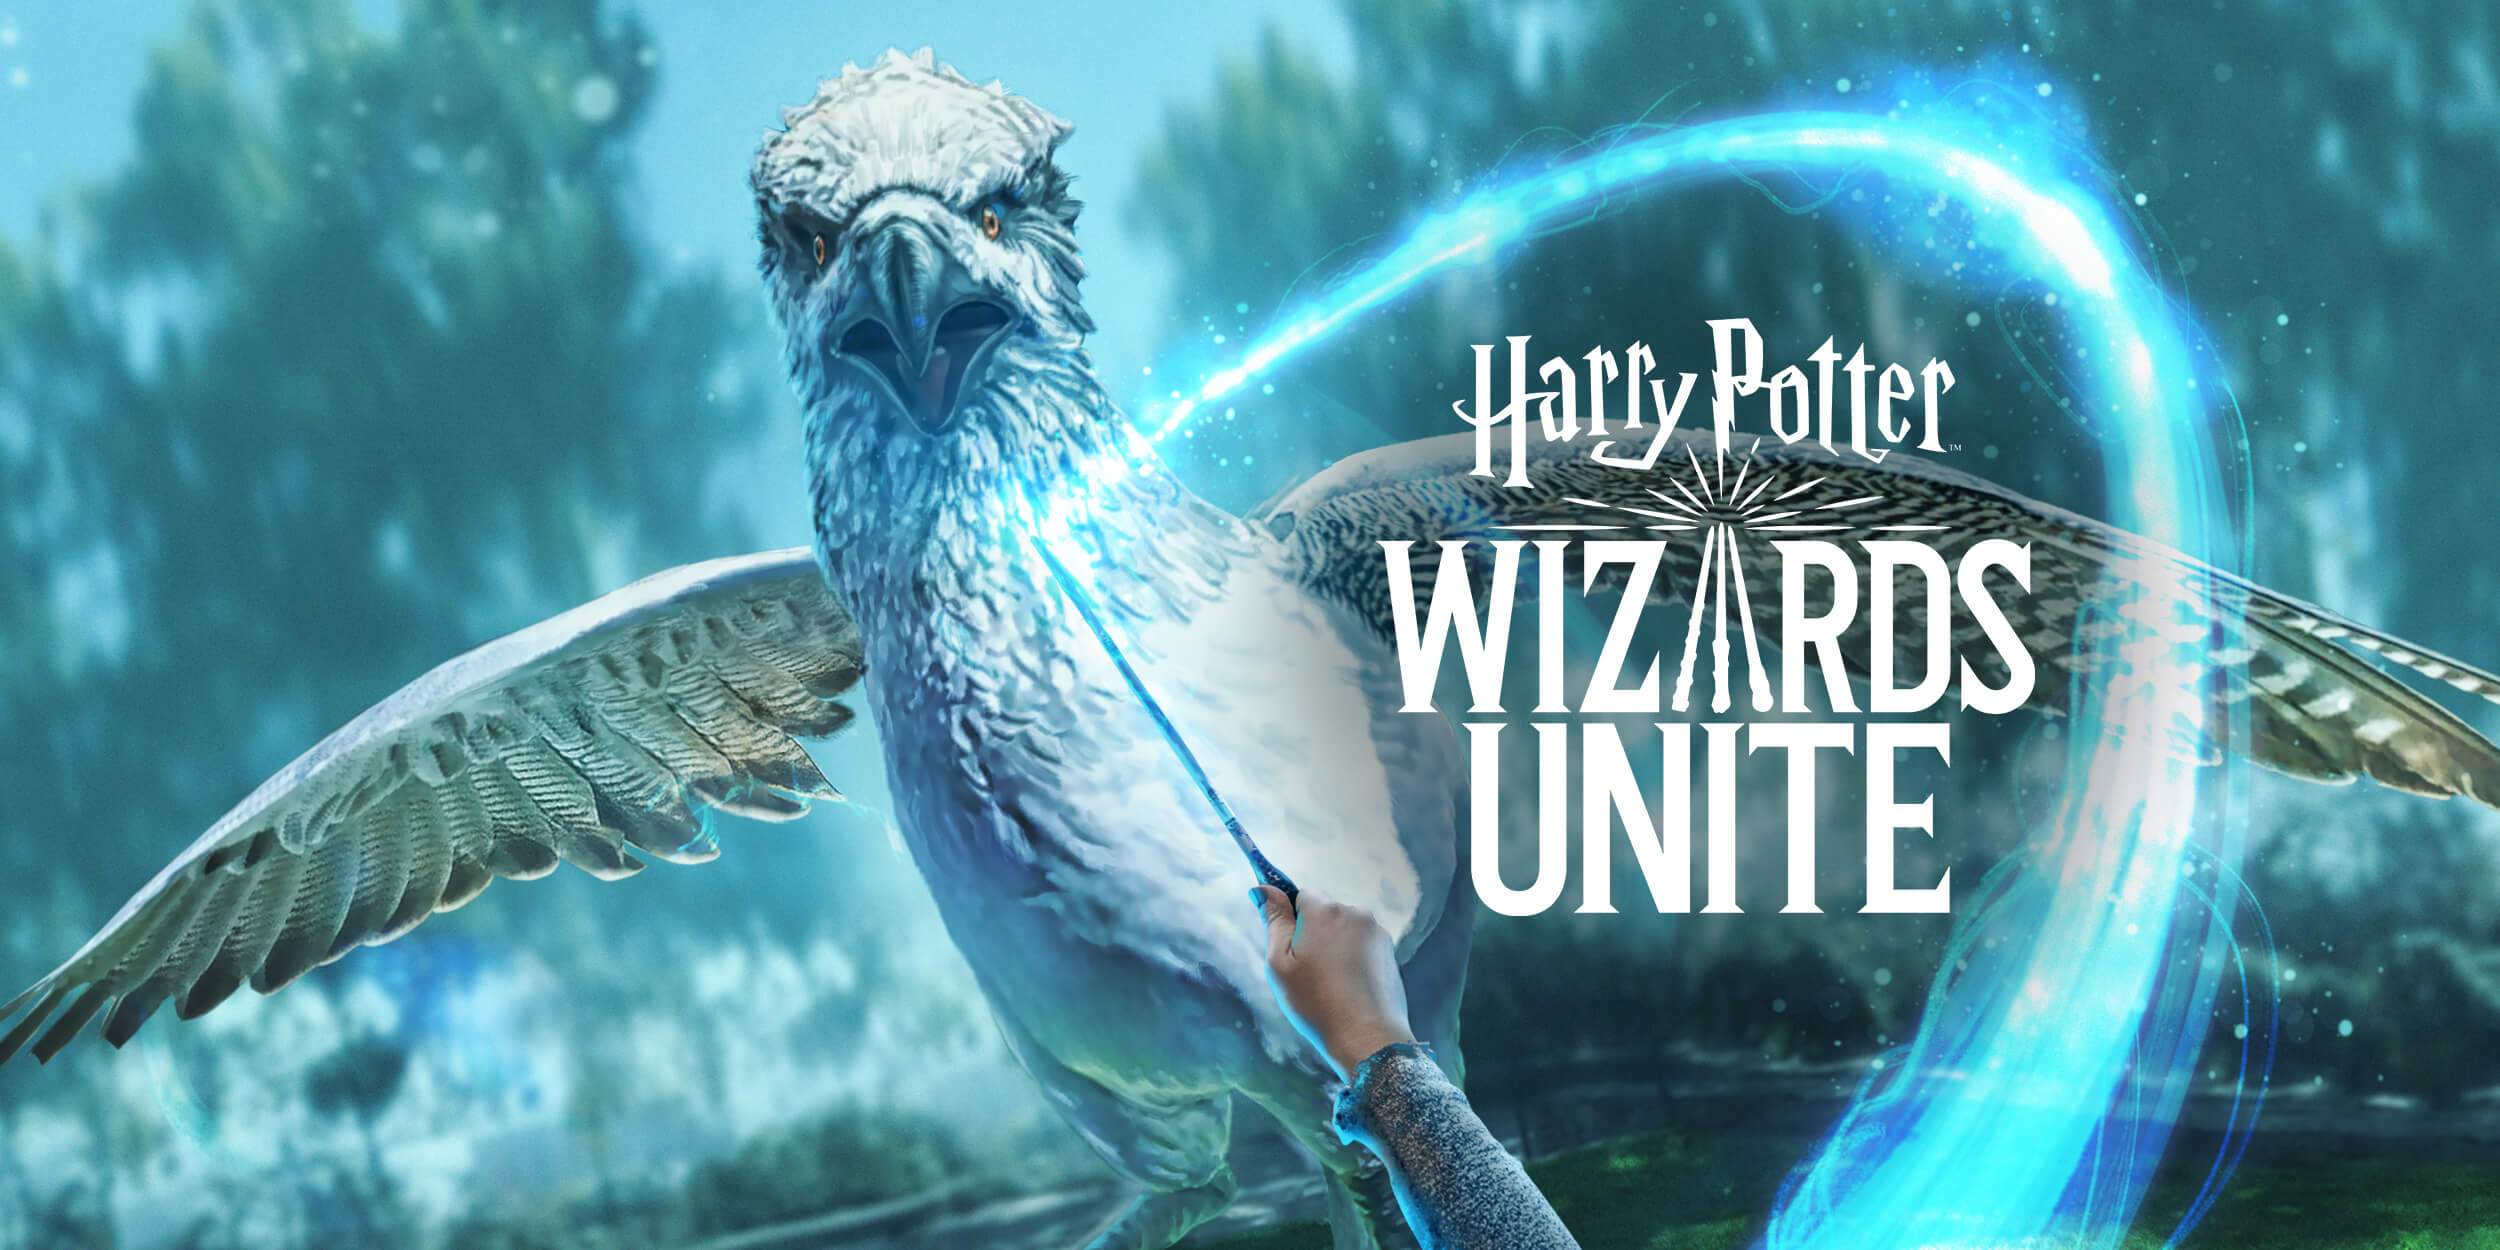 Niantic announces Harry Potter: Wizards Unite for iOS will be discontinued